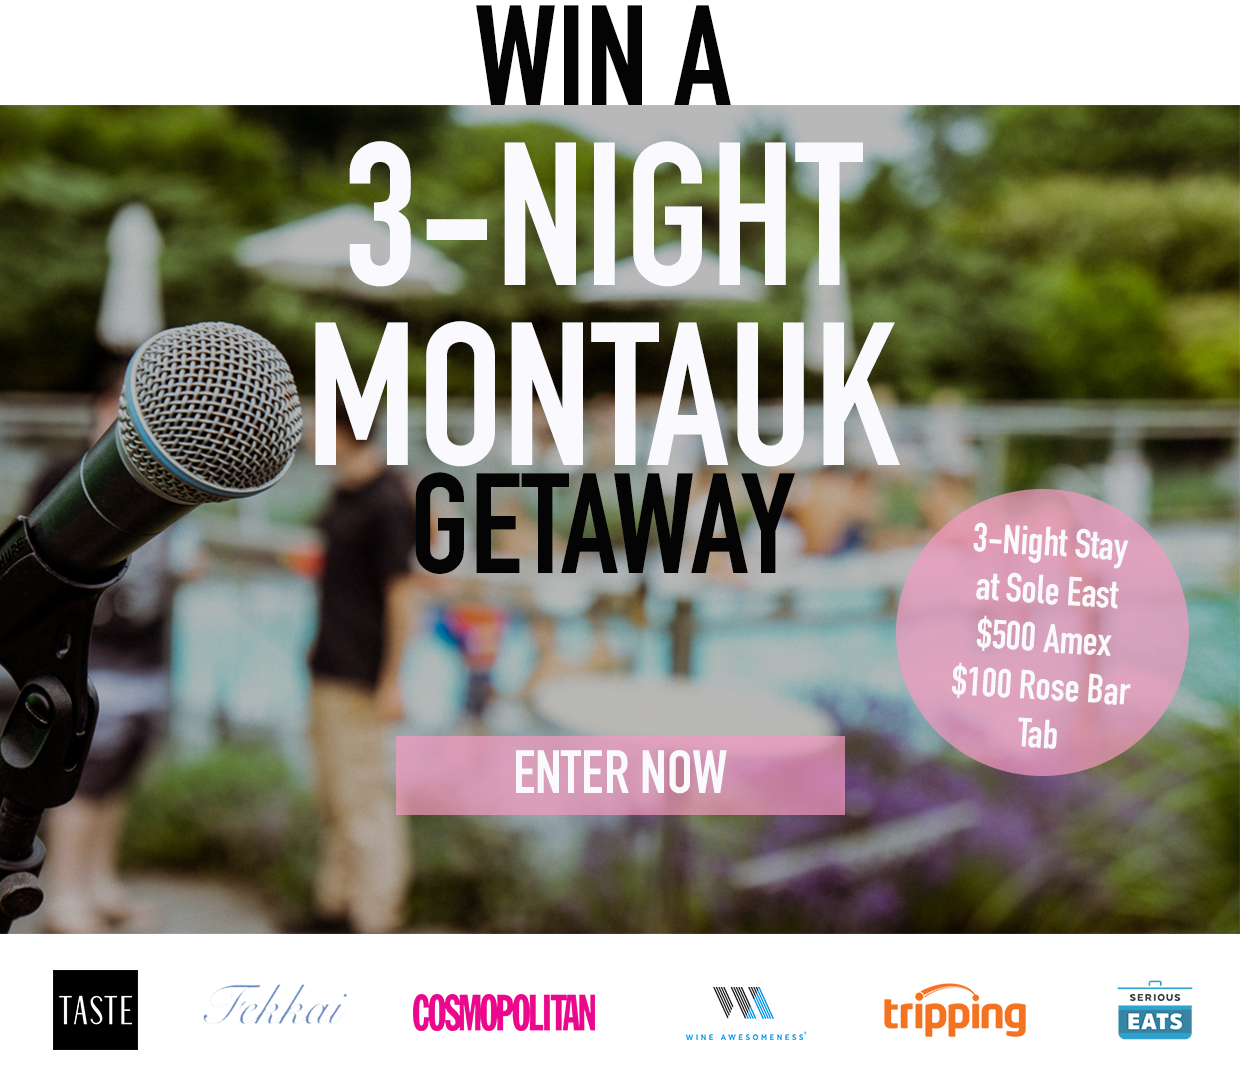 Enter for a chance to win an amazing weekend in Montauk. Welcome to a summer of curated weekends featuring culinary superstars, live music, wine, and more at Solé East Resort.